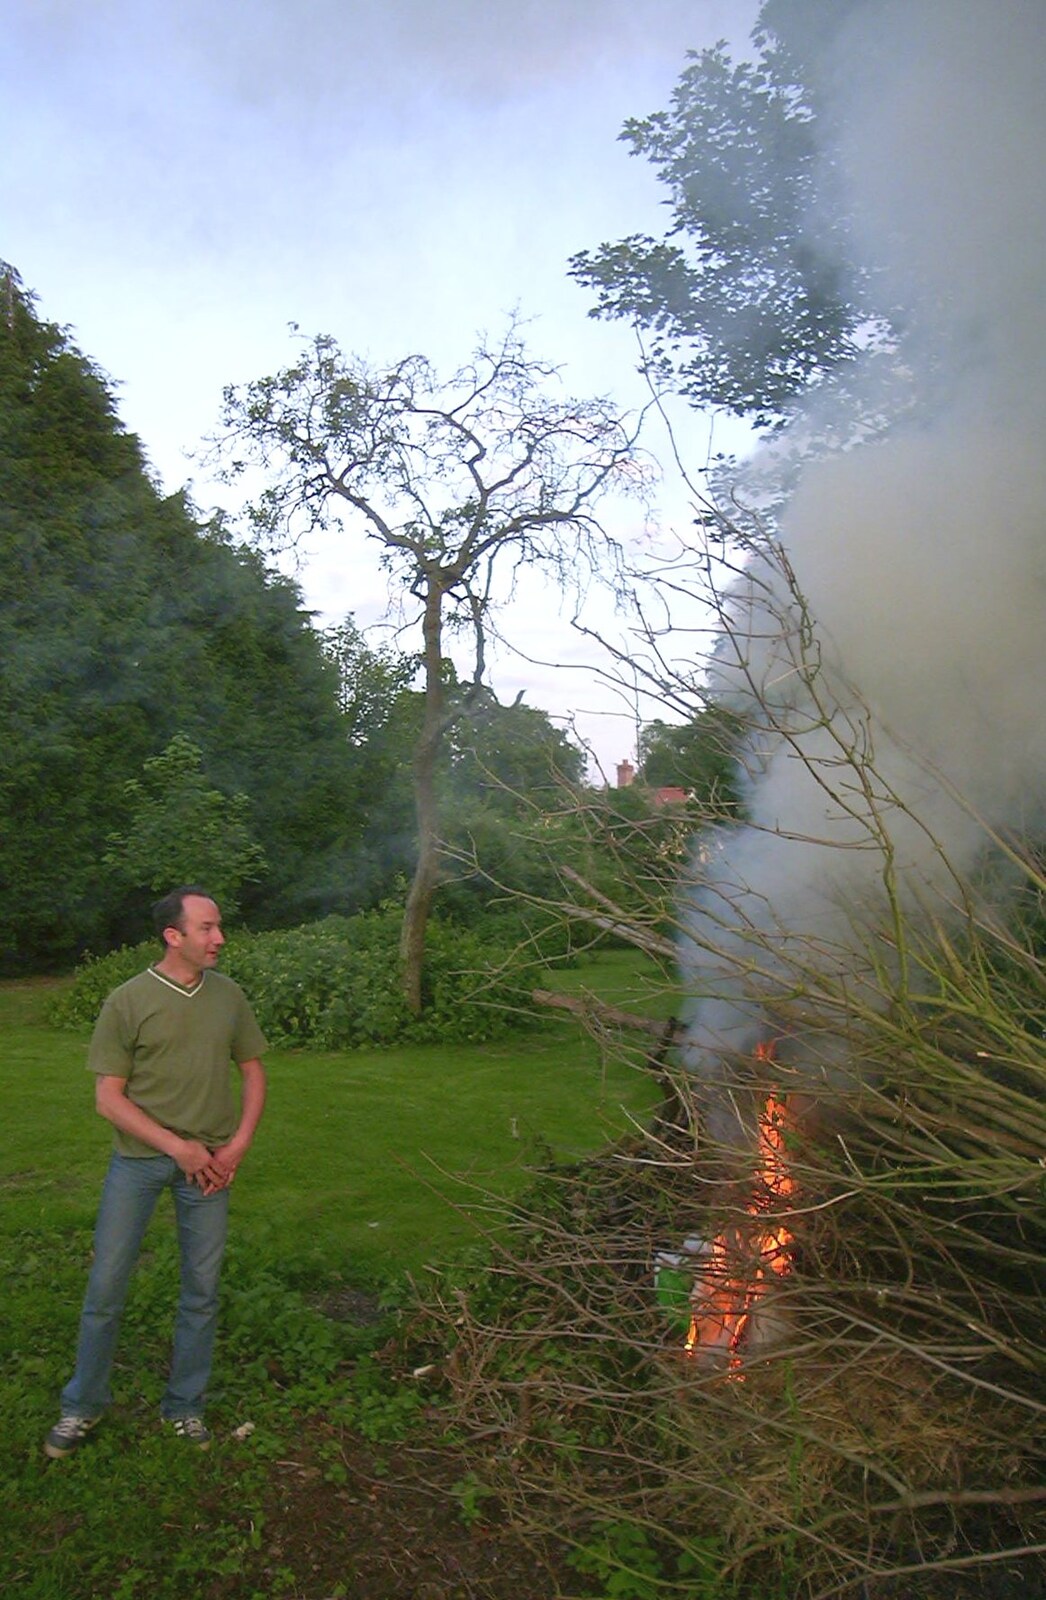 DH sets fire to a bonfire from DH's BSCC Barbeque, The Old Post Office, Brome, Suffolk - 7th July 2002